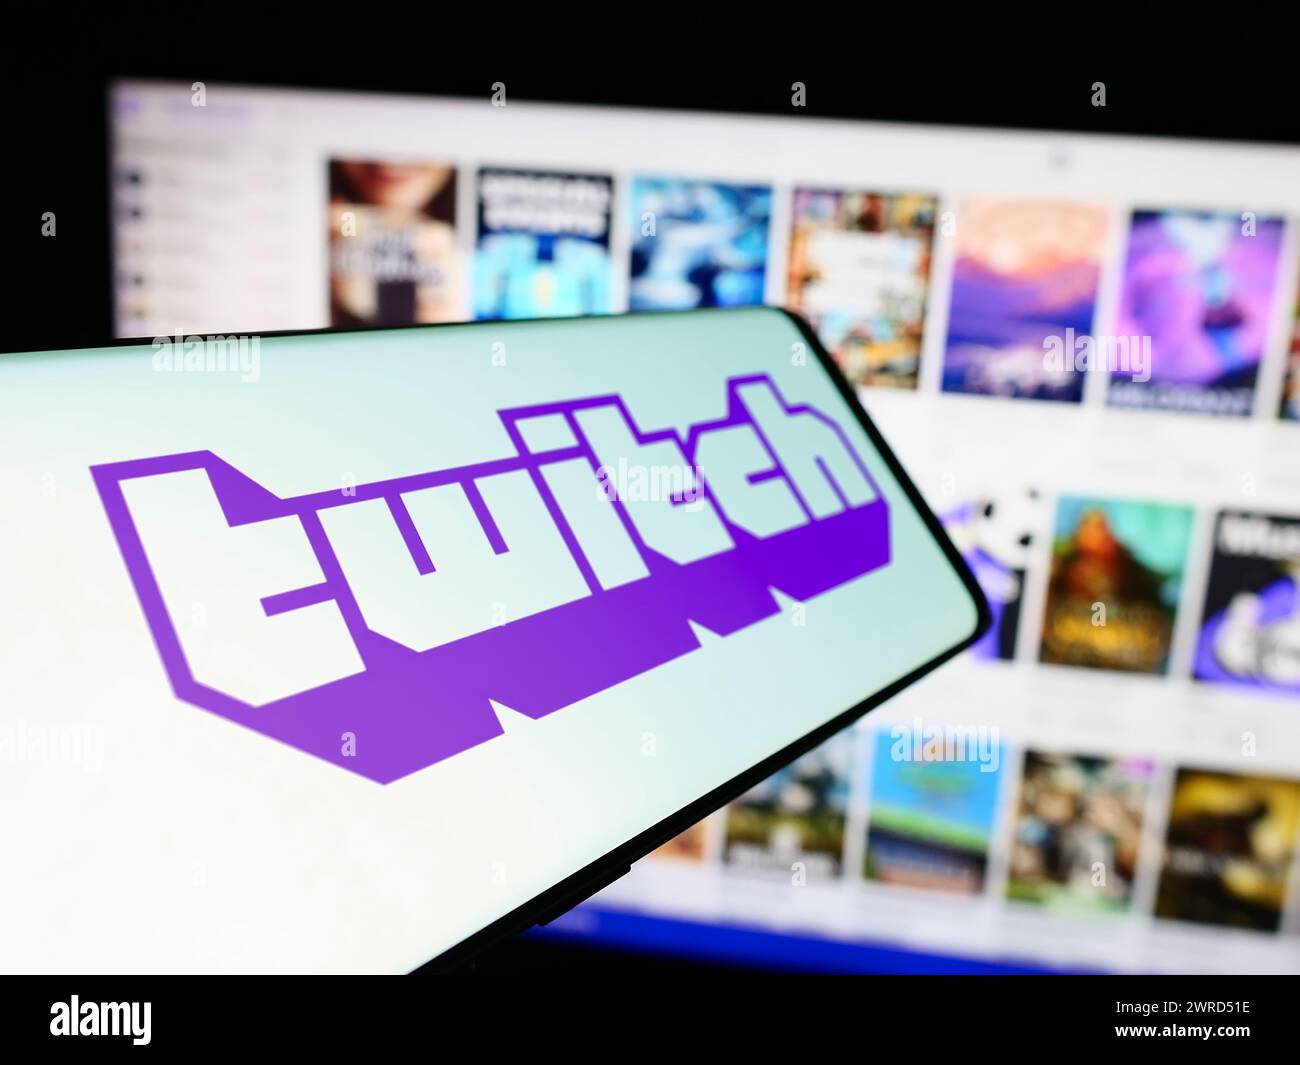 Cellphone with logo of American live streaming company Twitch Interactive Inc. in front of website. Focus on center-left of phone display. Stock Photo